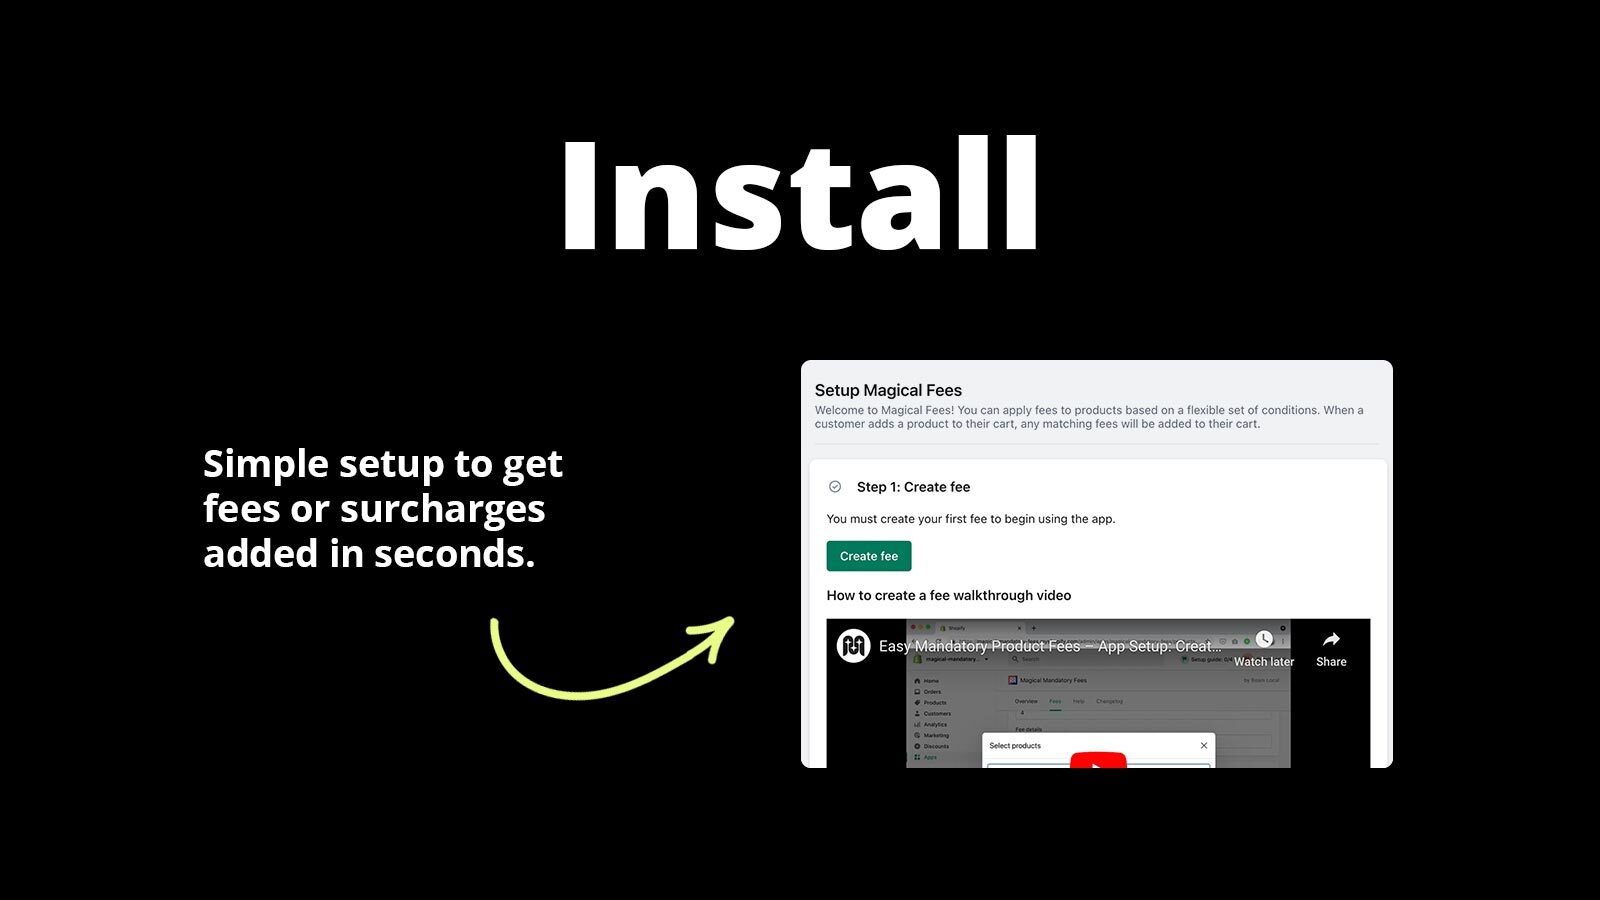 Install simple setup to get fees or surcharges added in seconds